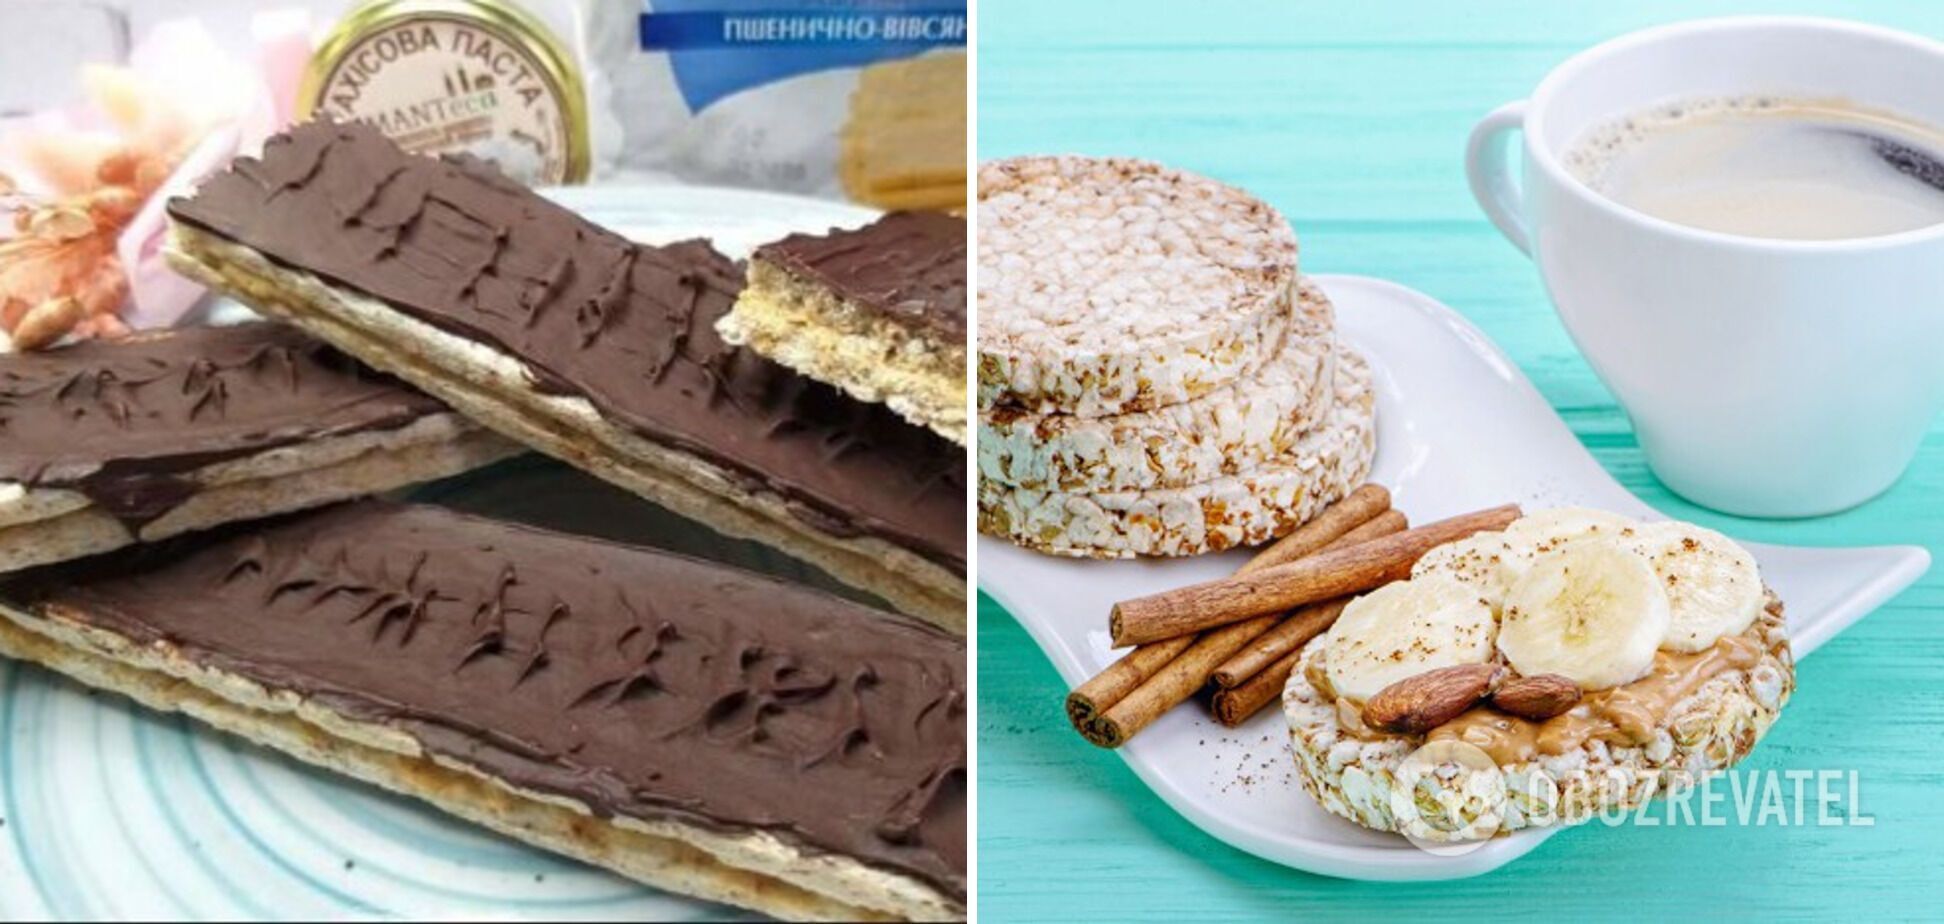 Rice cakes with nut butter and chocolate